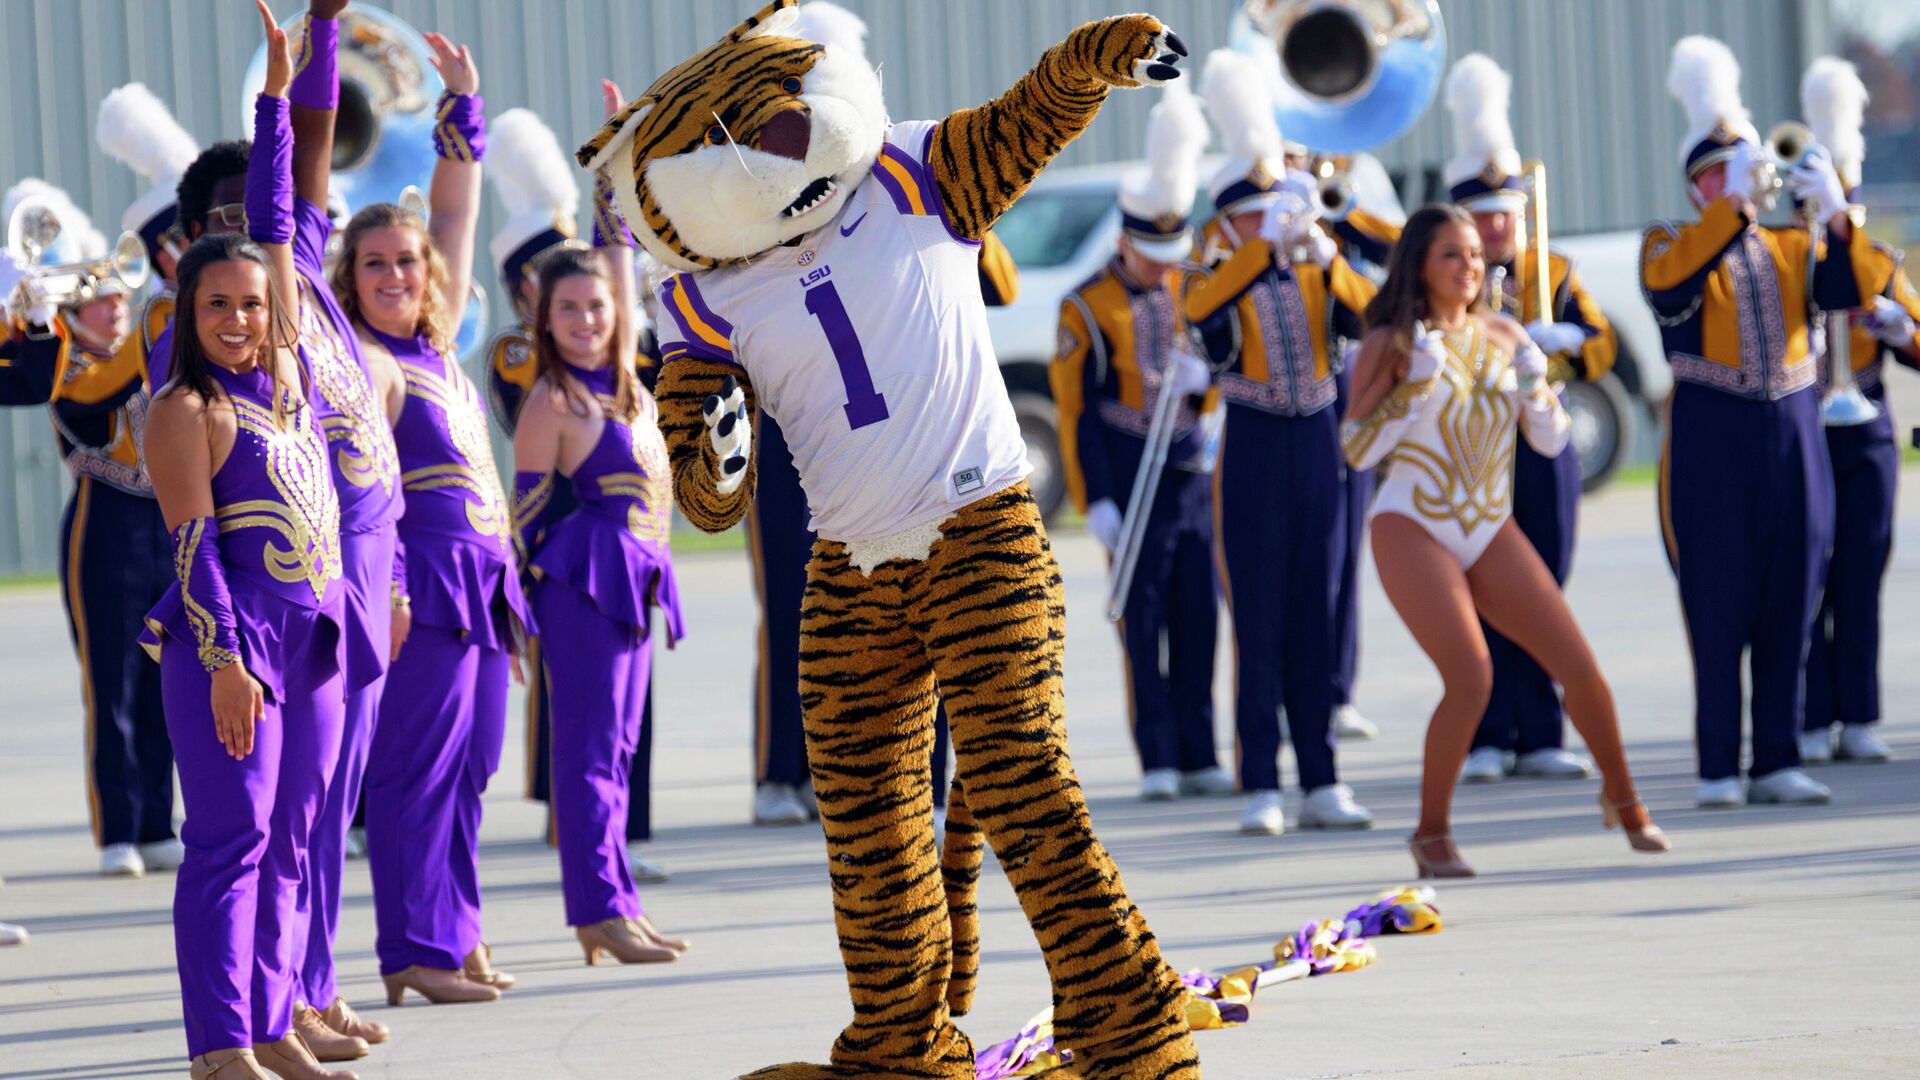 The LSU marching band and mascot perform as new football coach Brian Kelly arrives at Baton Rouge Metropolitan Airport, Tuesday, Nov. 30, 2021, in Baton Rouge, La. - Sputnik International, 1920, 05.01.2022